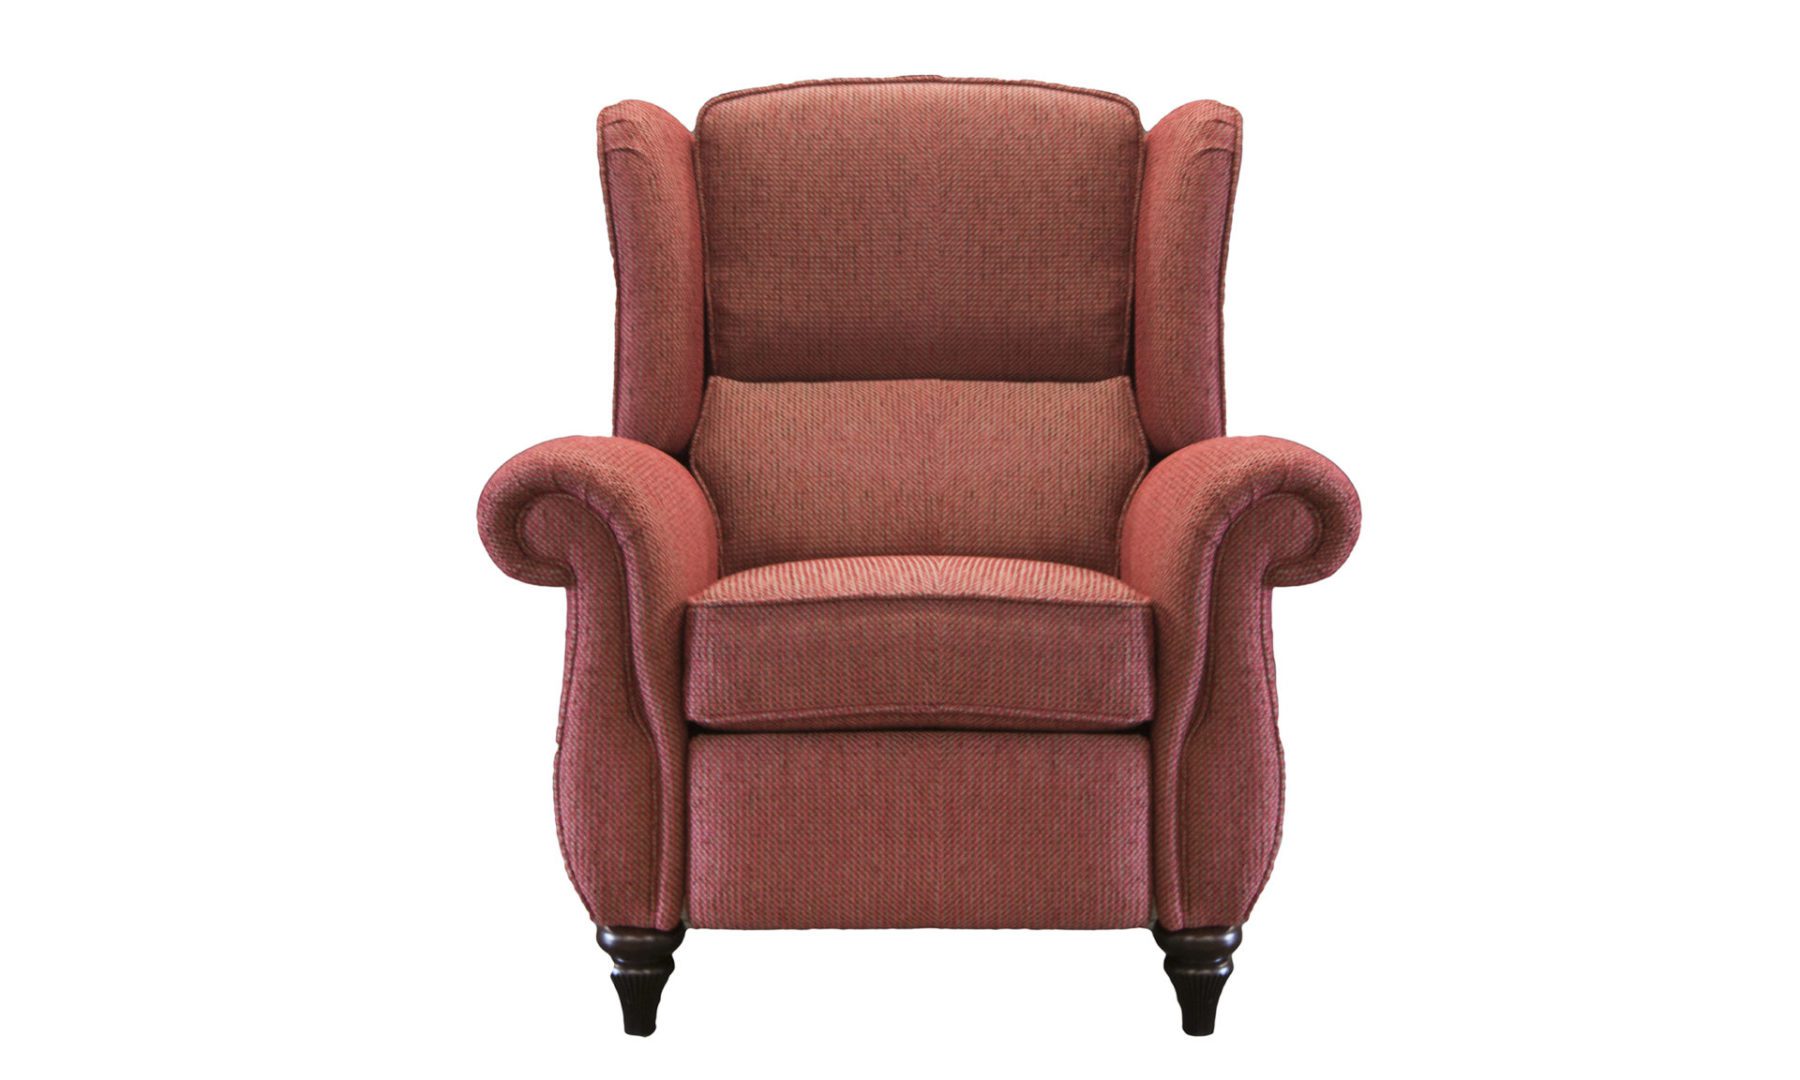 Greville Recliner Chair Discontinued Fabric - Fontington Tessuto 1551